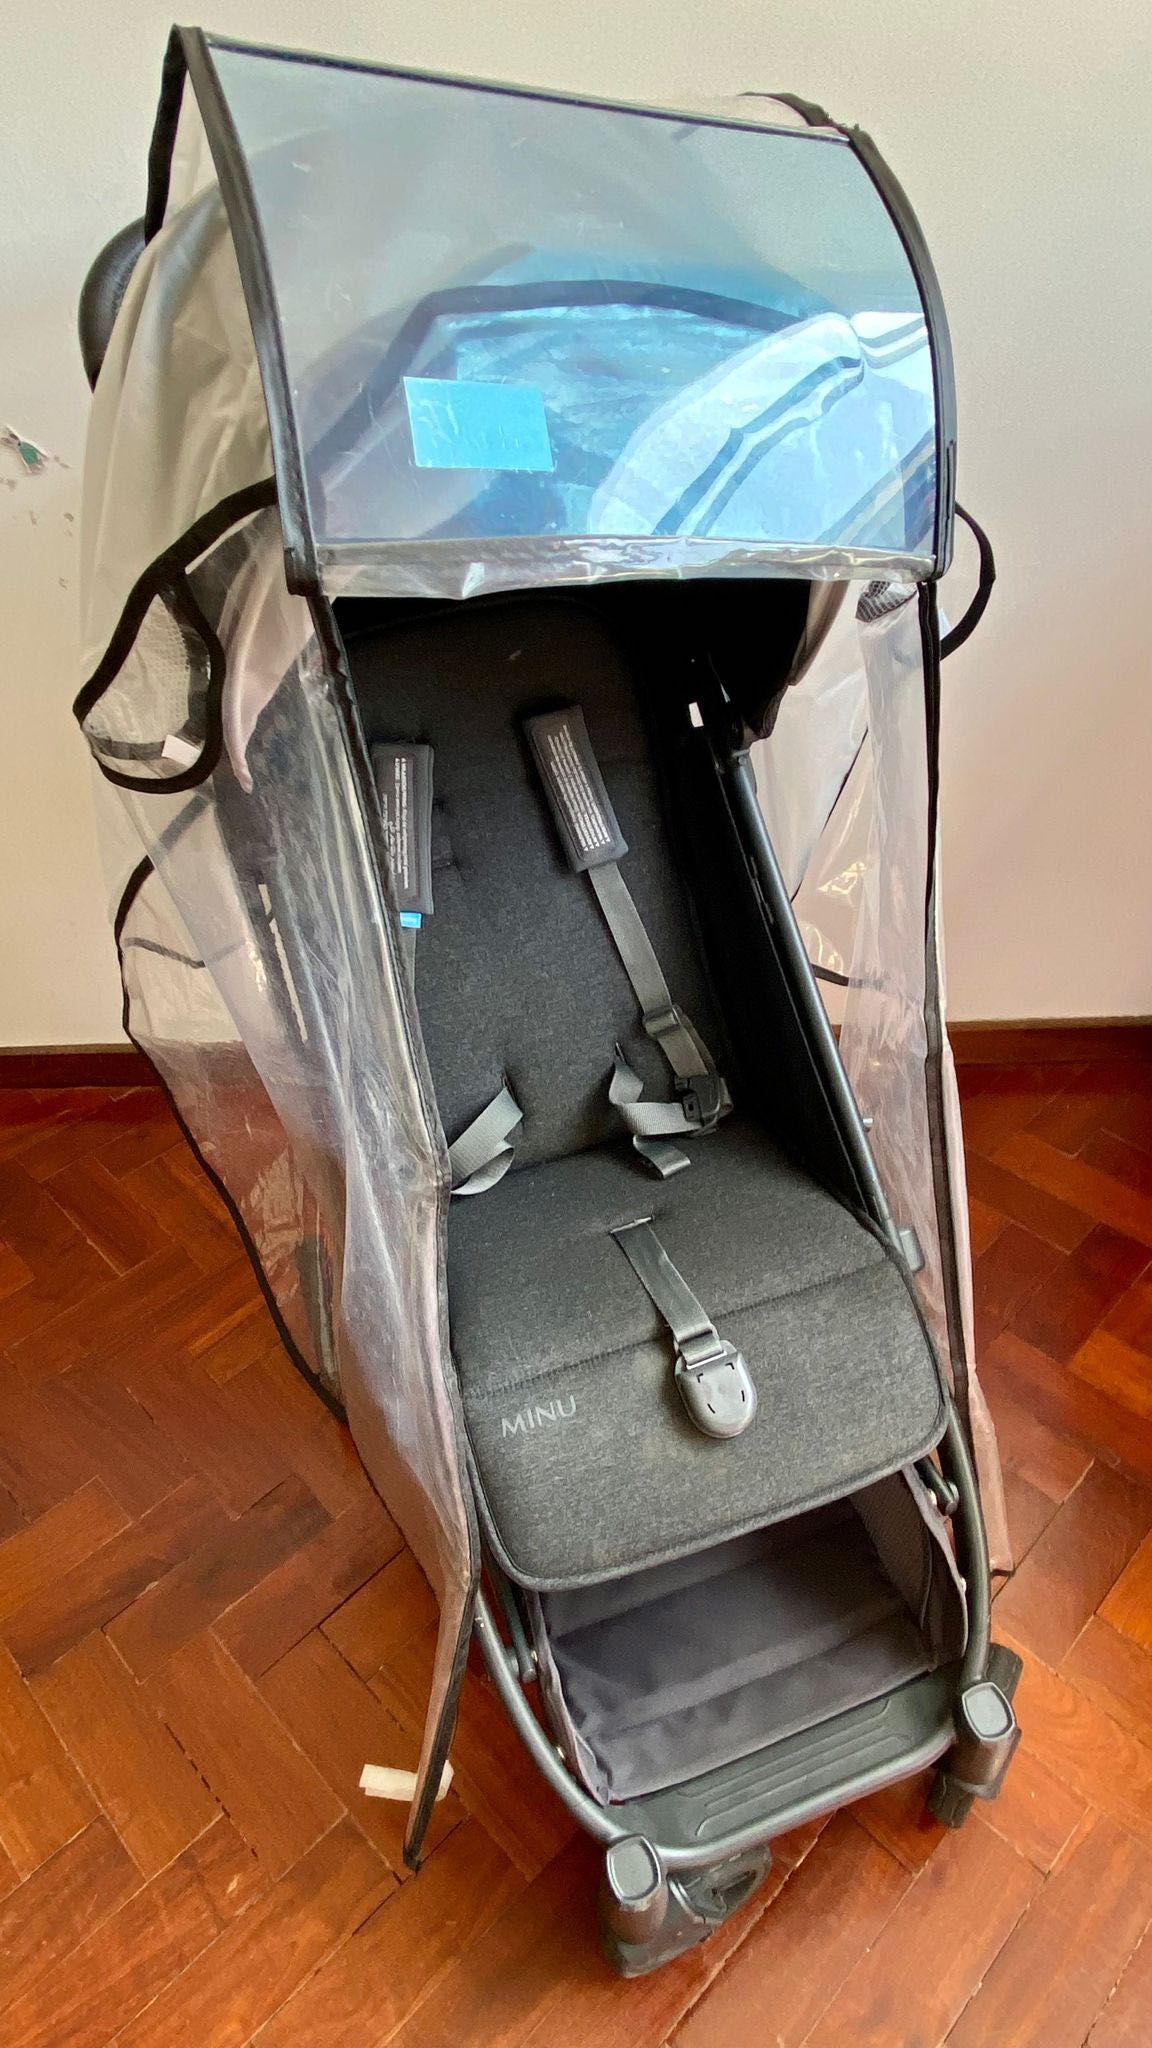 UppaBaby Minu Stroller + seat cover + rain cover